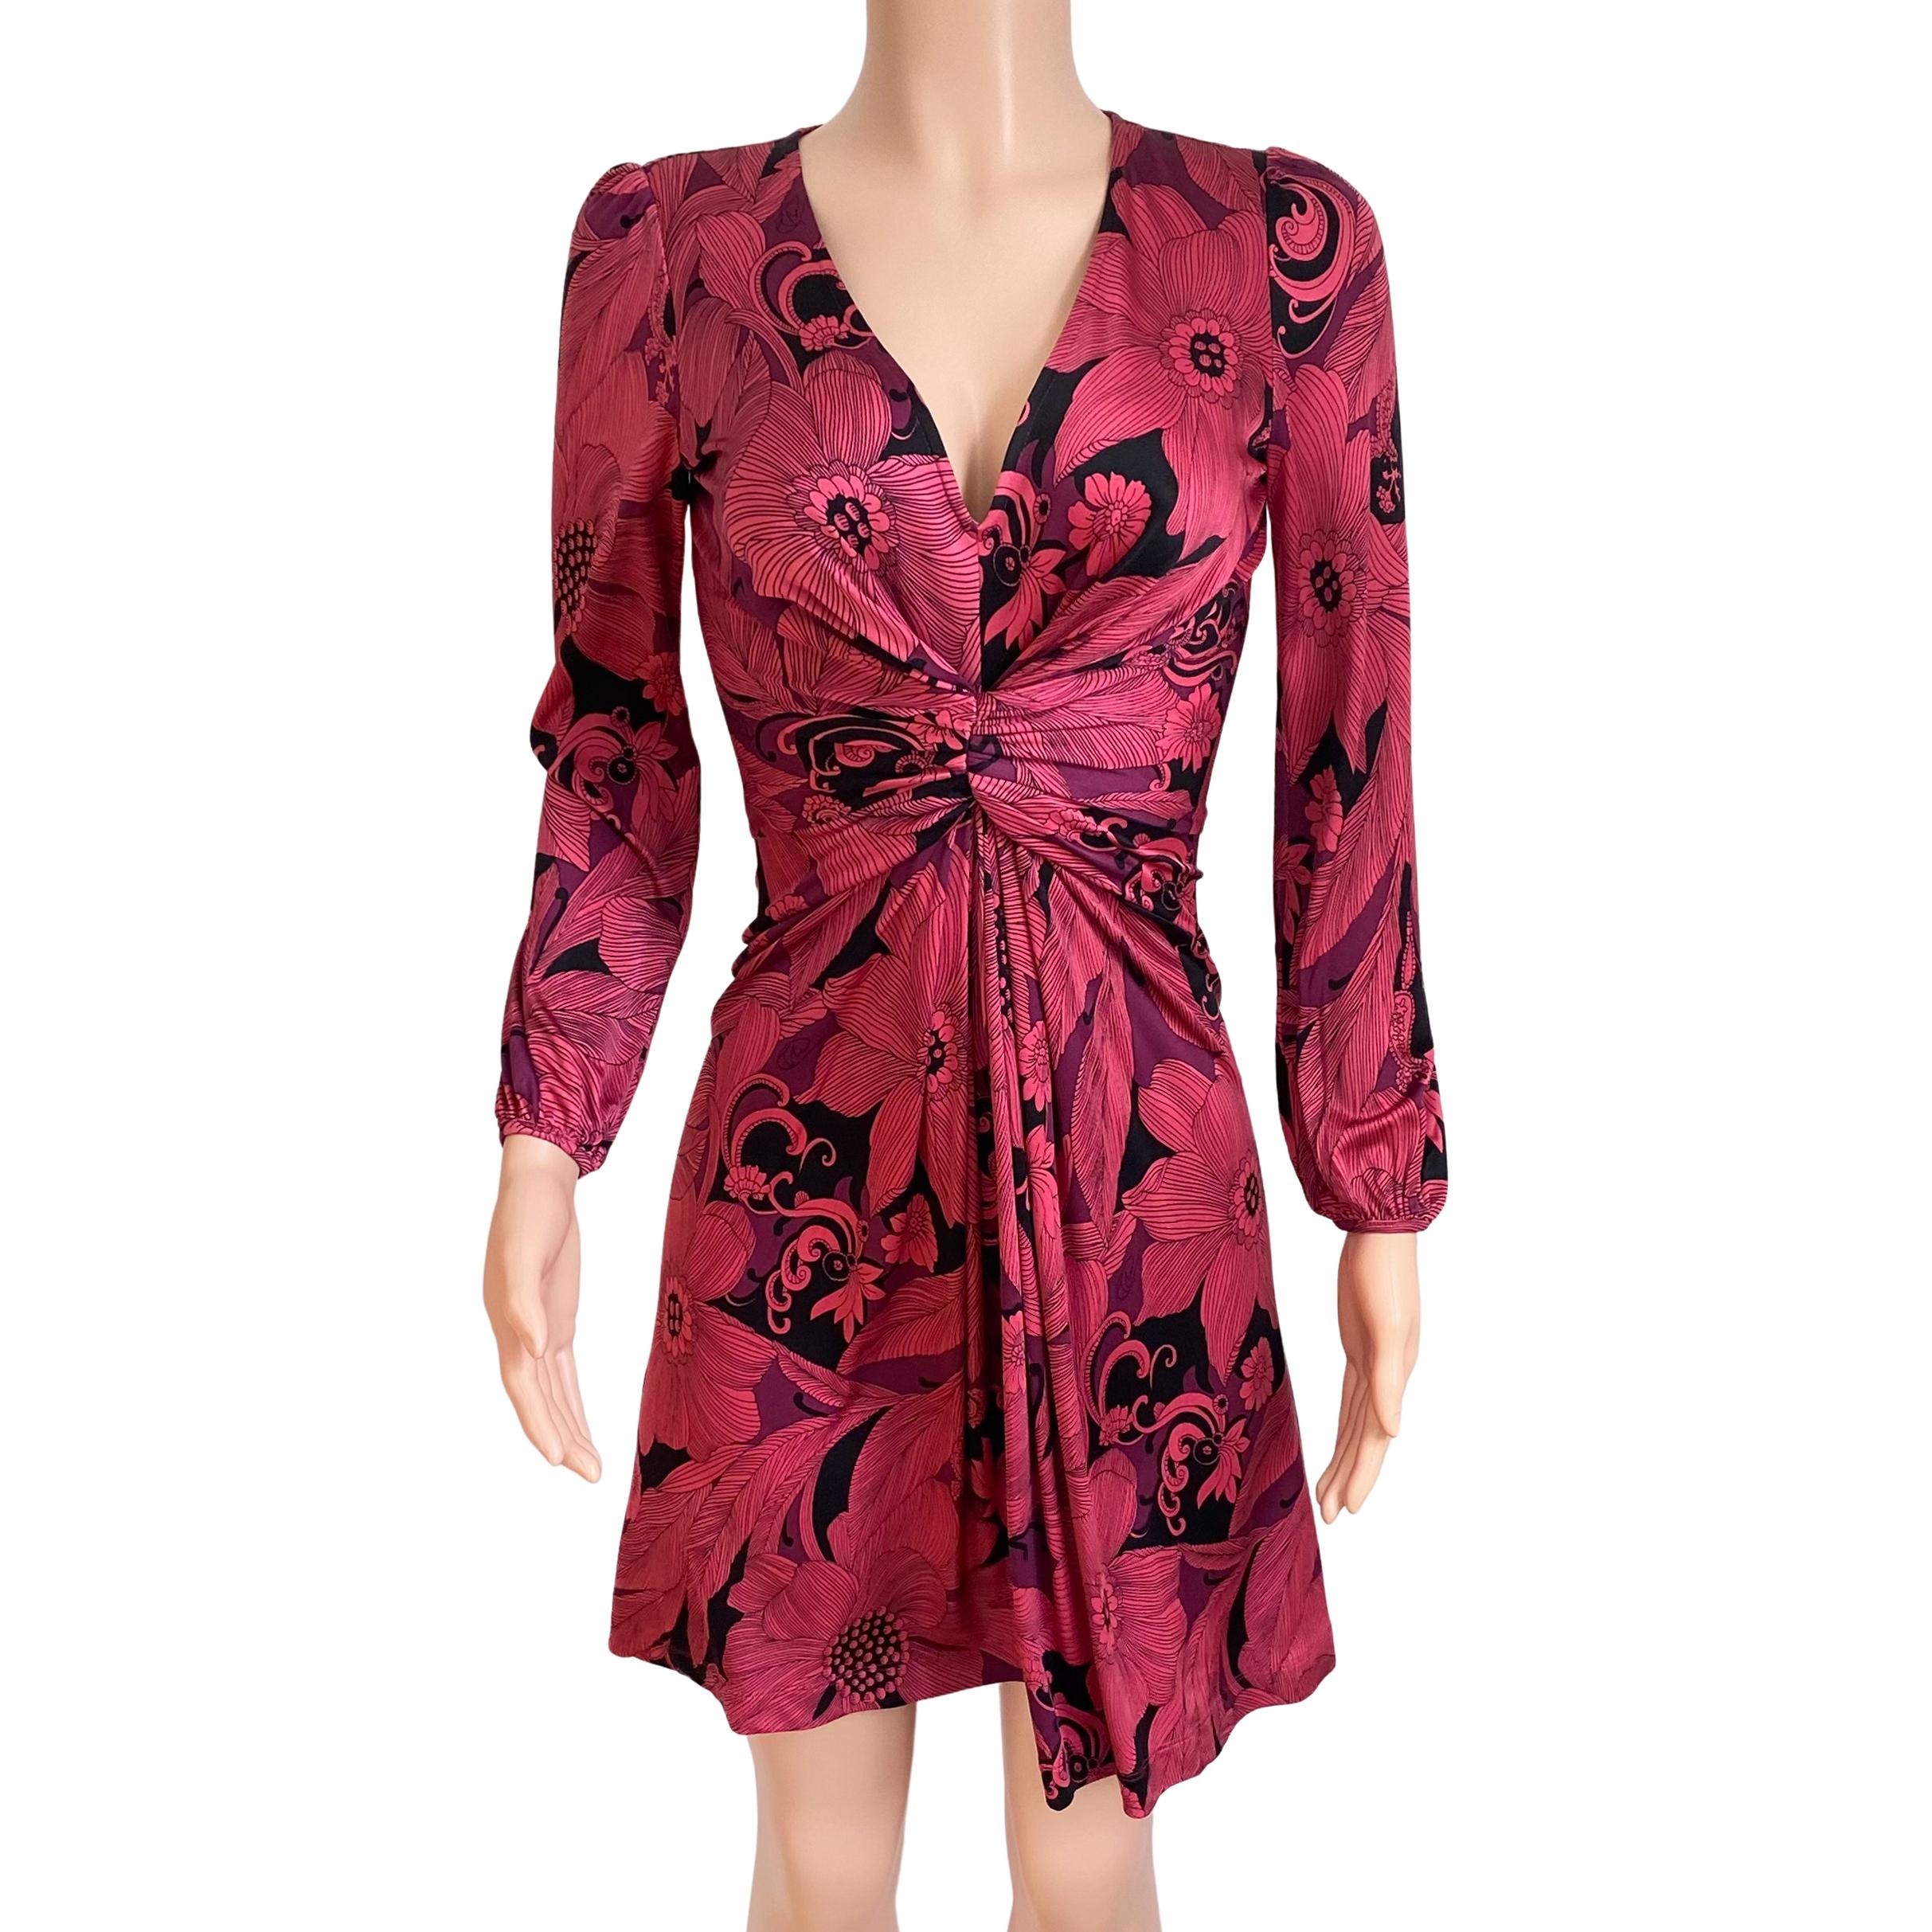 Condition: NEW WITH TAG.
Fabric: Silk Jersey 
Print: Exclusive etched floral print in cranberry and black. 
Deep plunge V-neck. Invisible zipper back. Lots of volume in movement,
Approximately 38